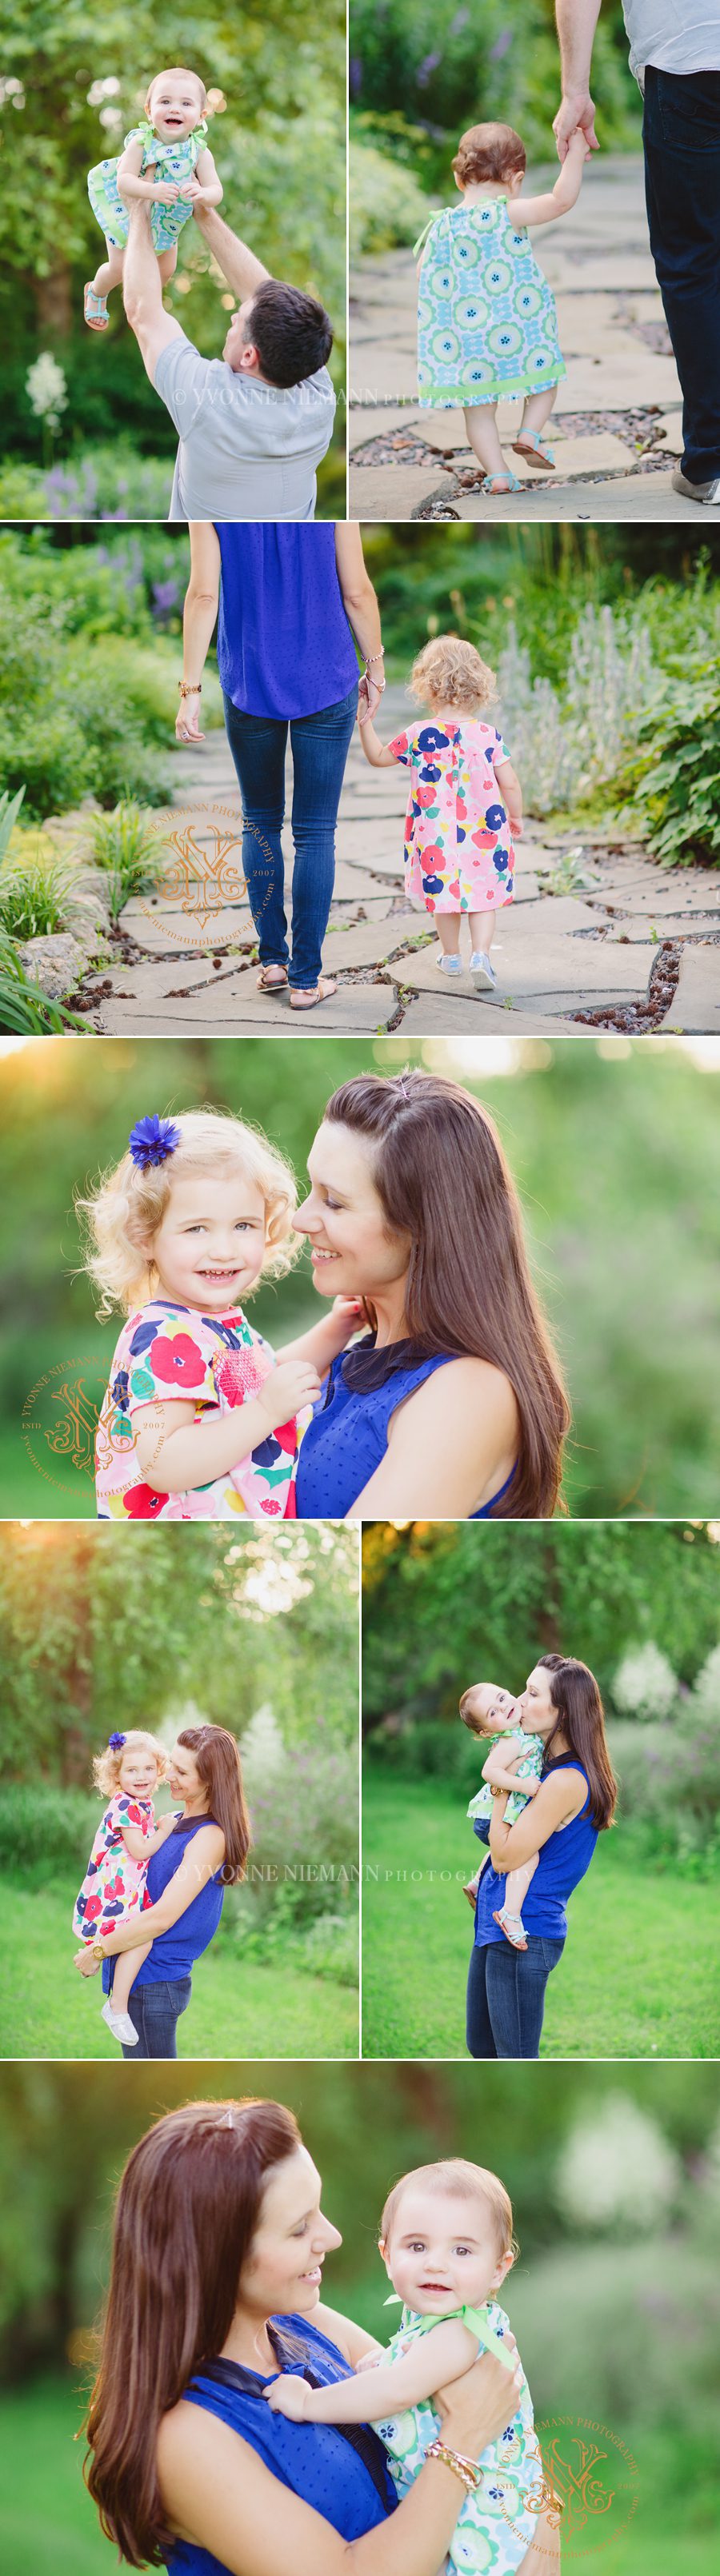 Fun and pretty family photography in Lafayette Park by Yvonne Niemann Photography.